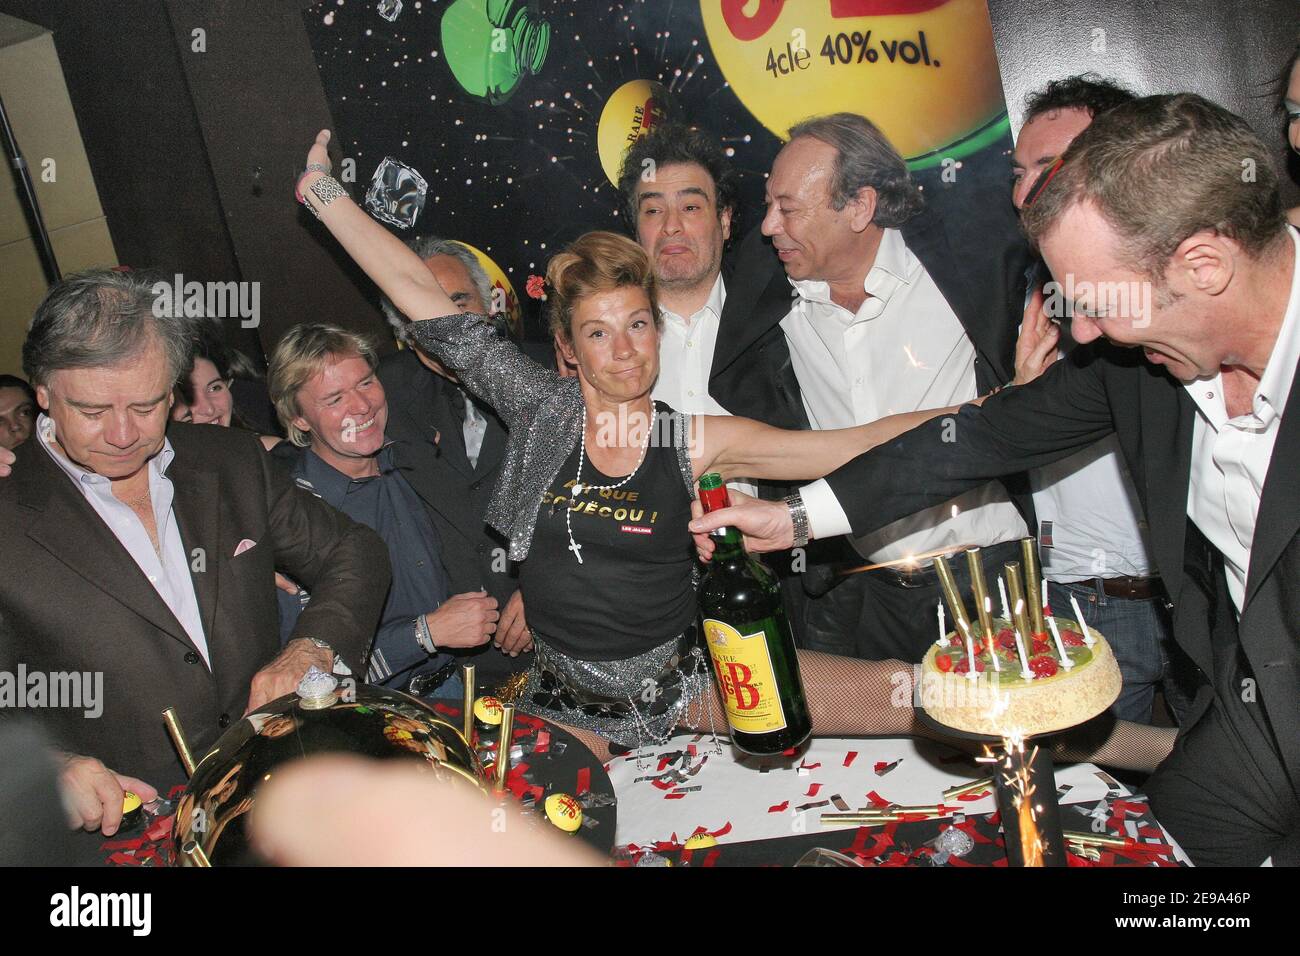 French socialite Frigide Barjot attends Franck Couecou's birthday party at the club 'L'Etoile' in Paris, France, on May 2, 2006. Photo by Benoit Pinguet/ABACAPRESS.COM. Stock Photo